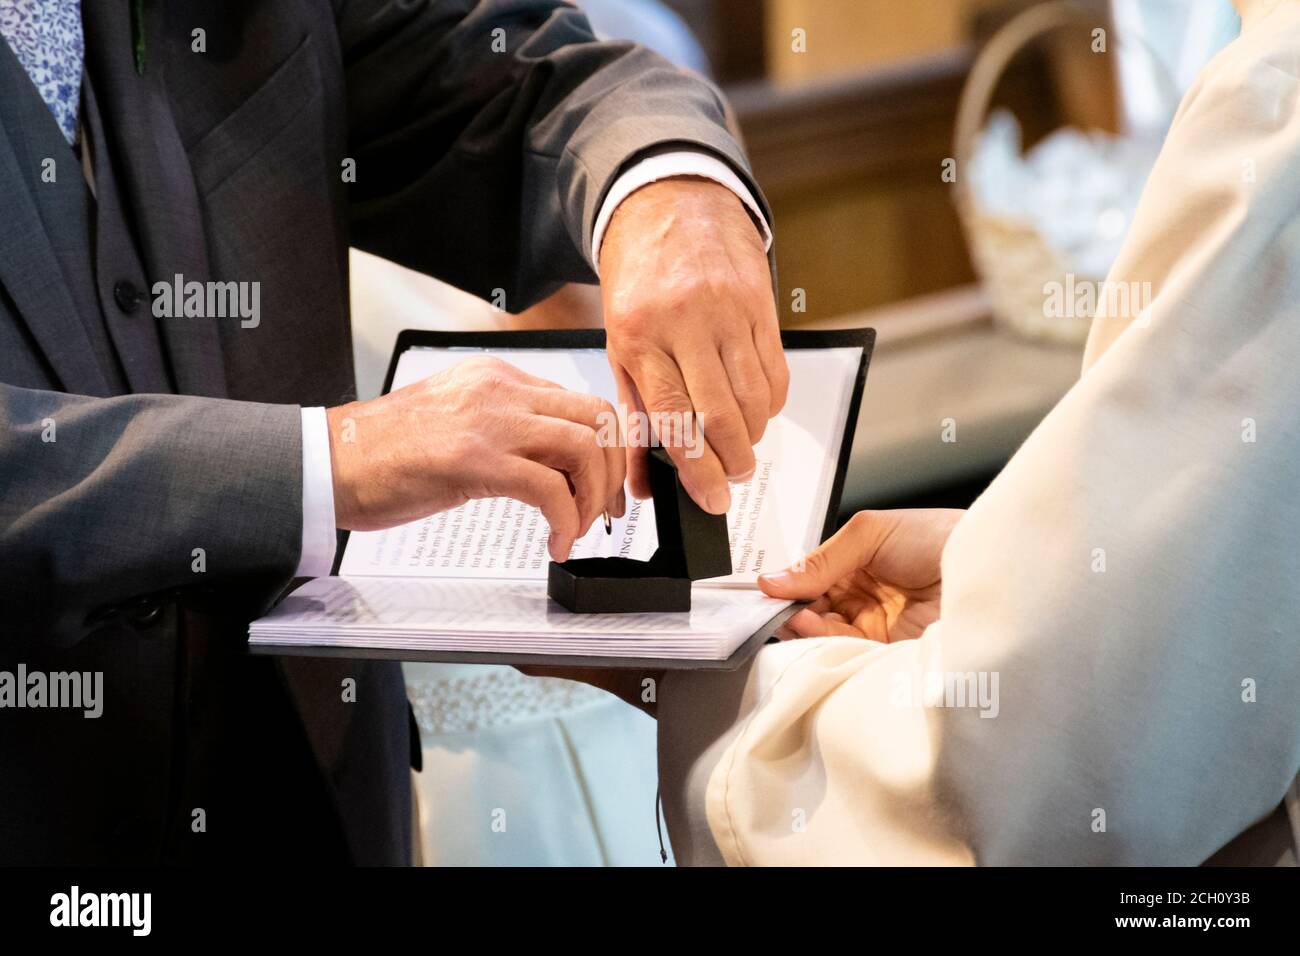 Wedding day hands with wedding ring. Stock Photo